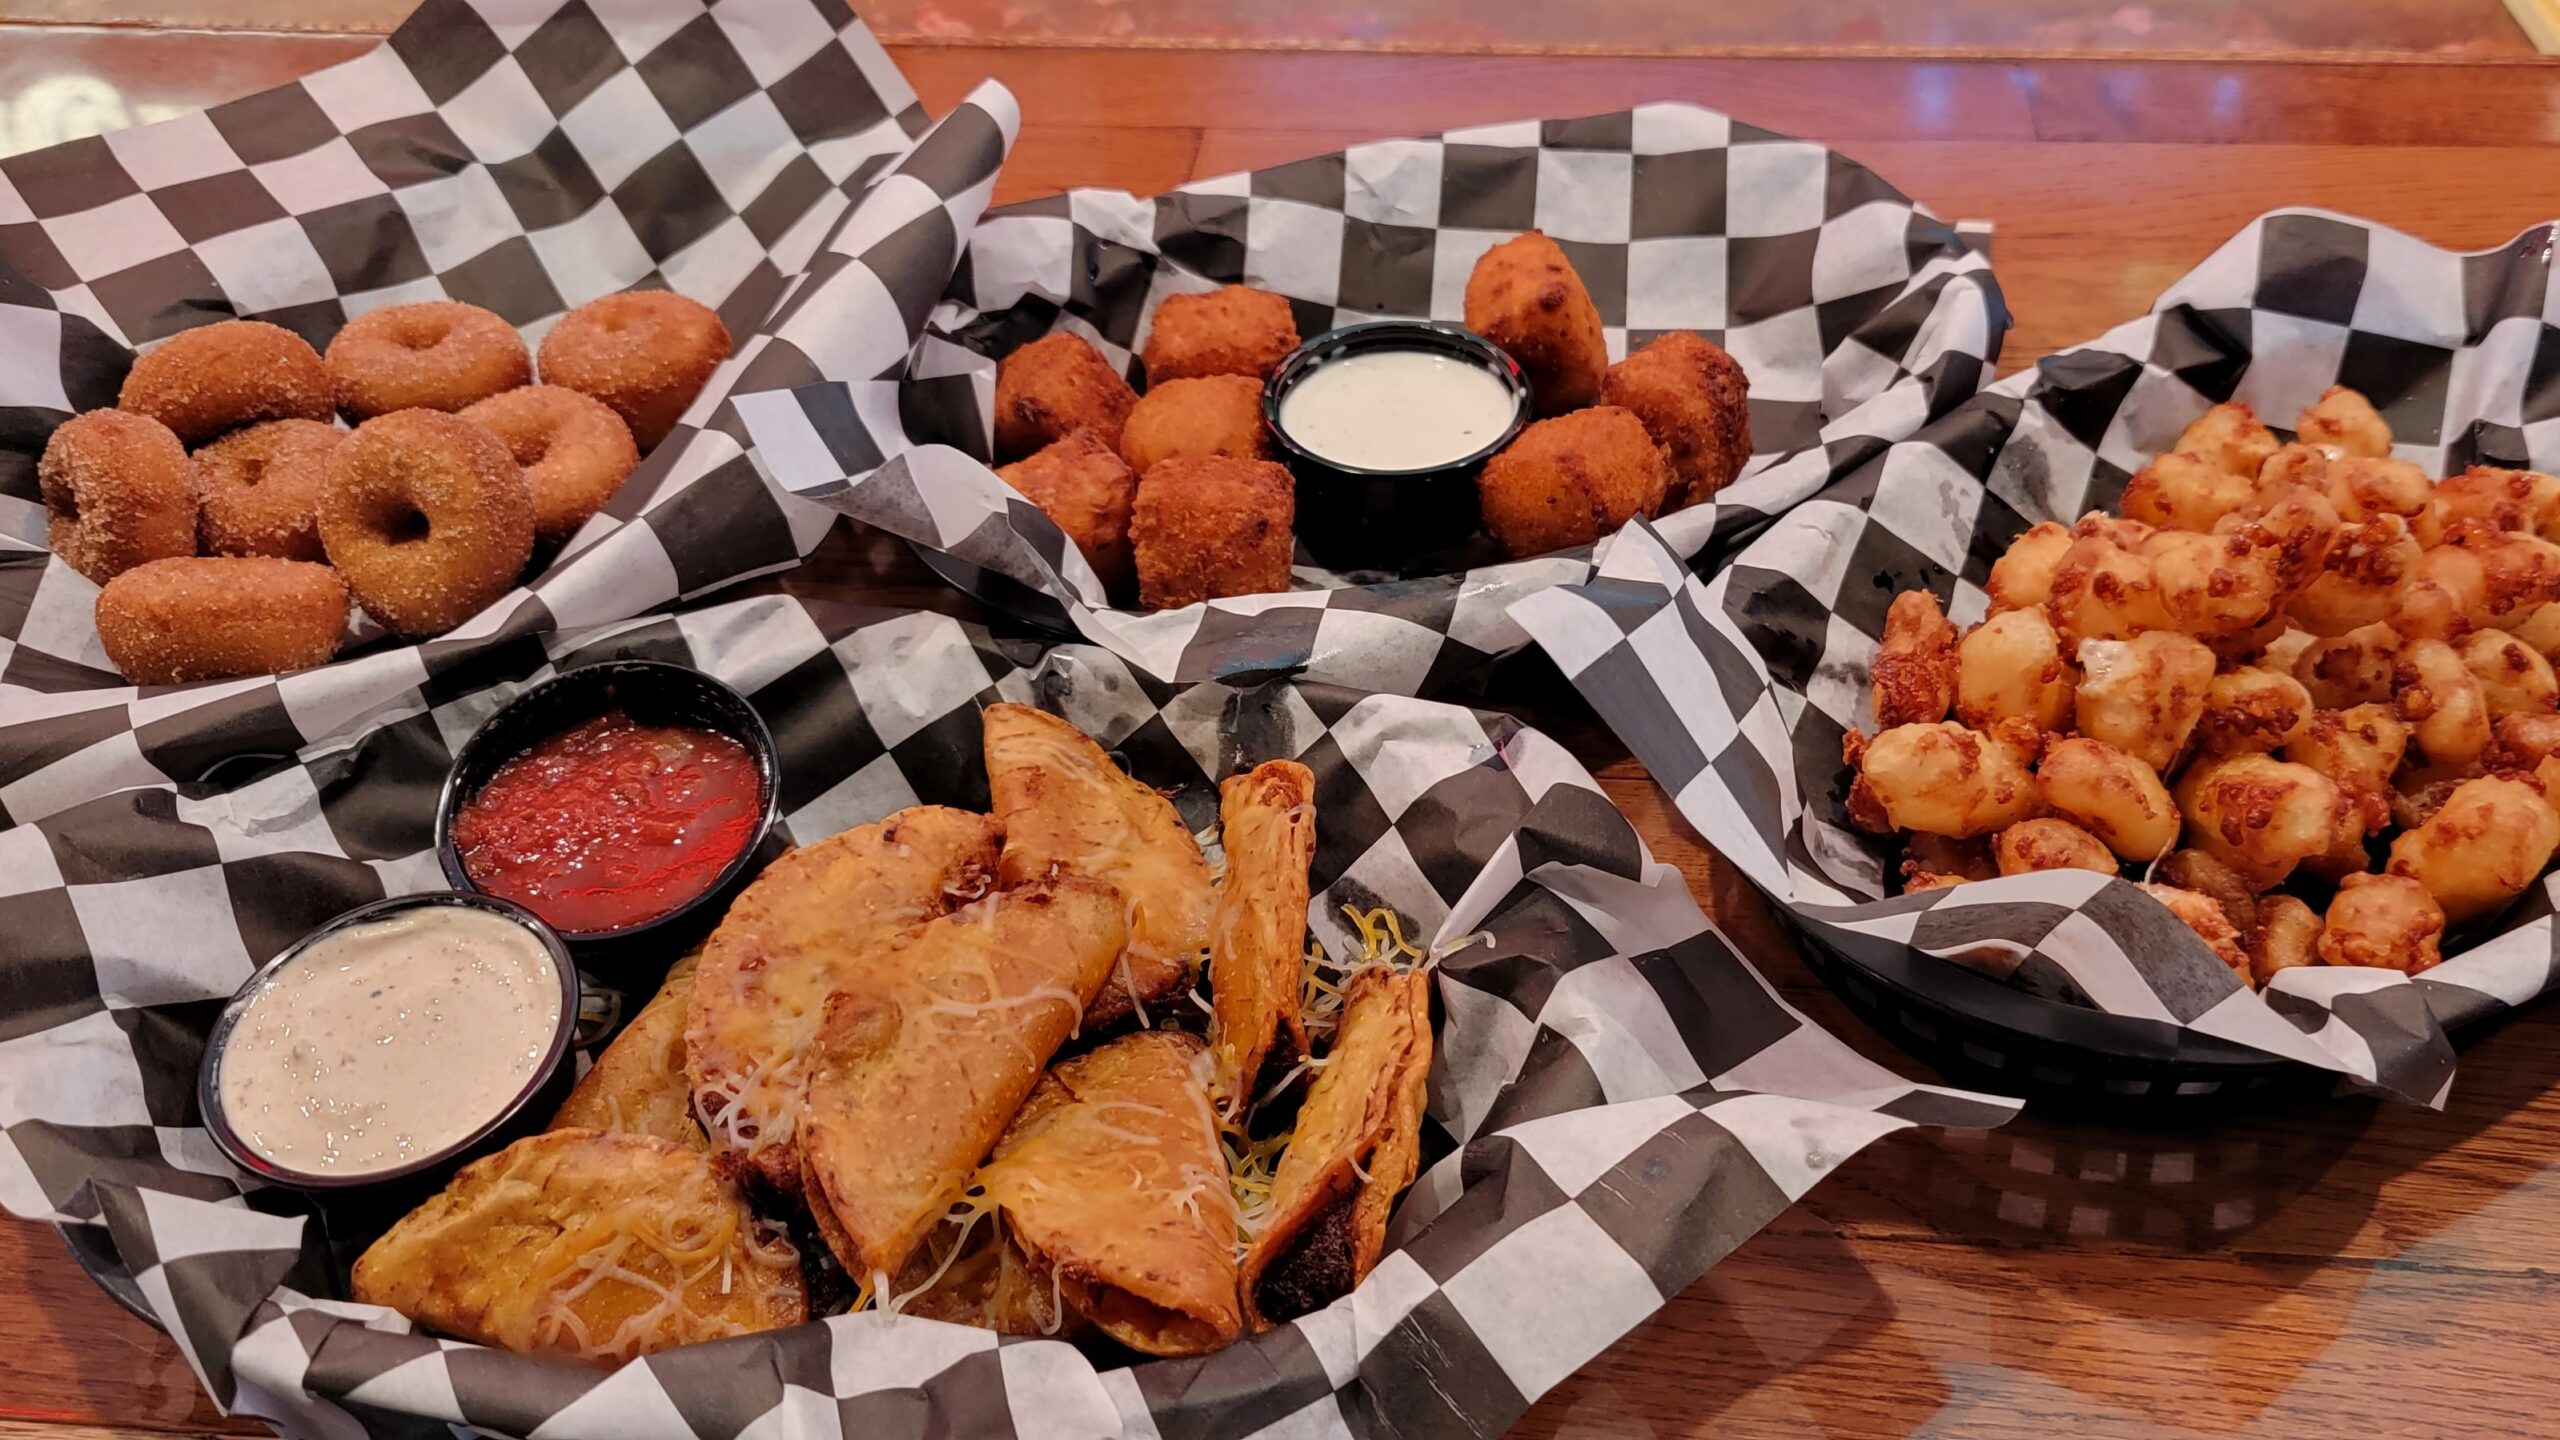 cheese curds, mini donuts, mini tacos, mac-n-cheese bites in baskets with black & white checkered paper